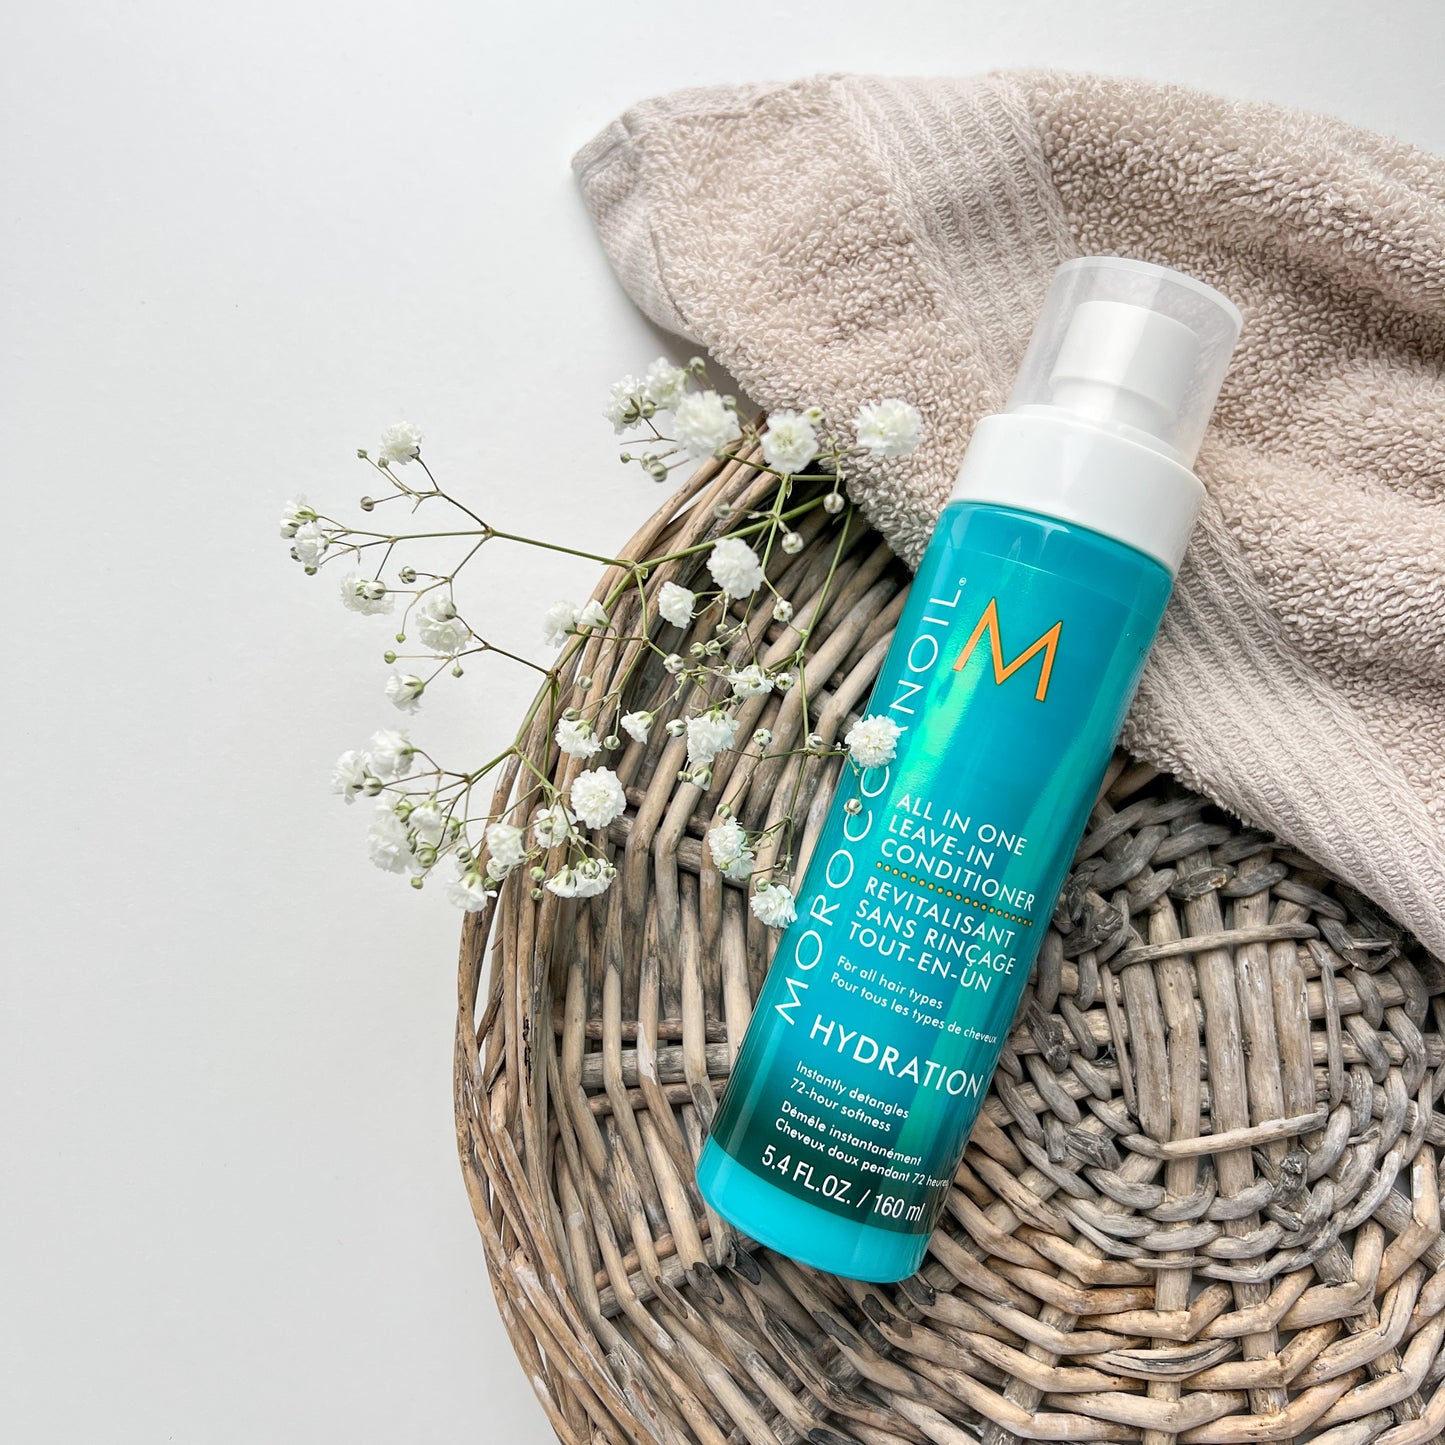 MOROCCANOIL ALL IN ONE LEAVE-IN CONDITIONER - 160 ML